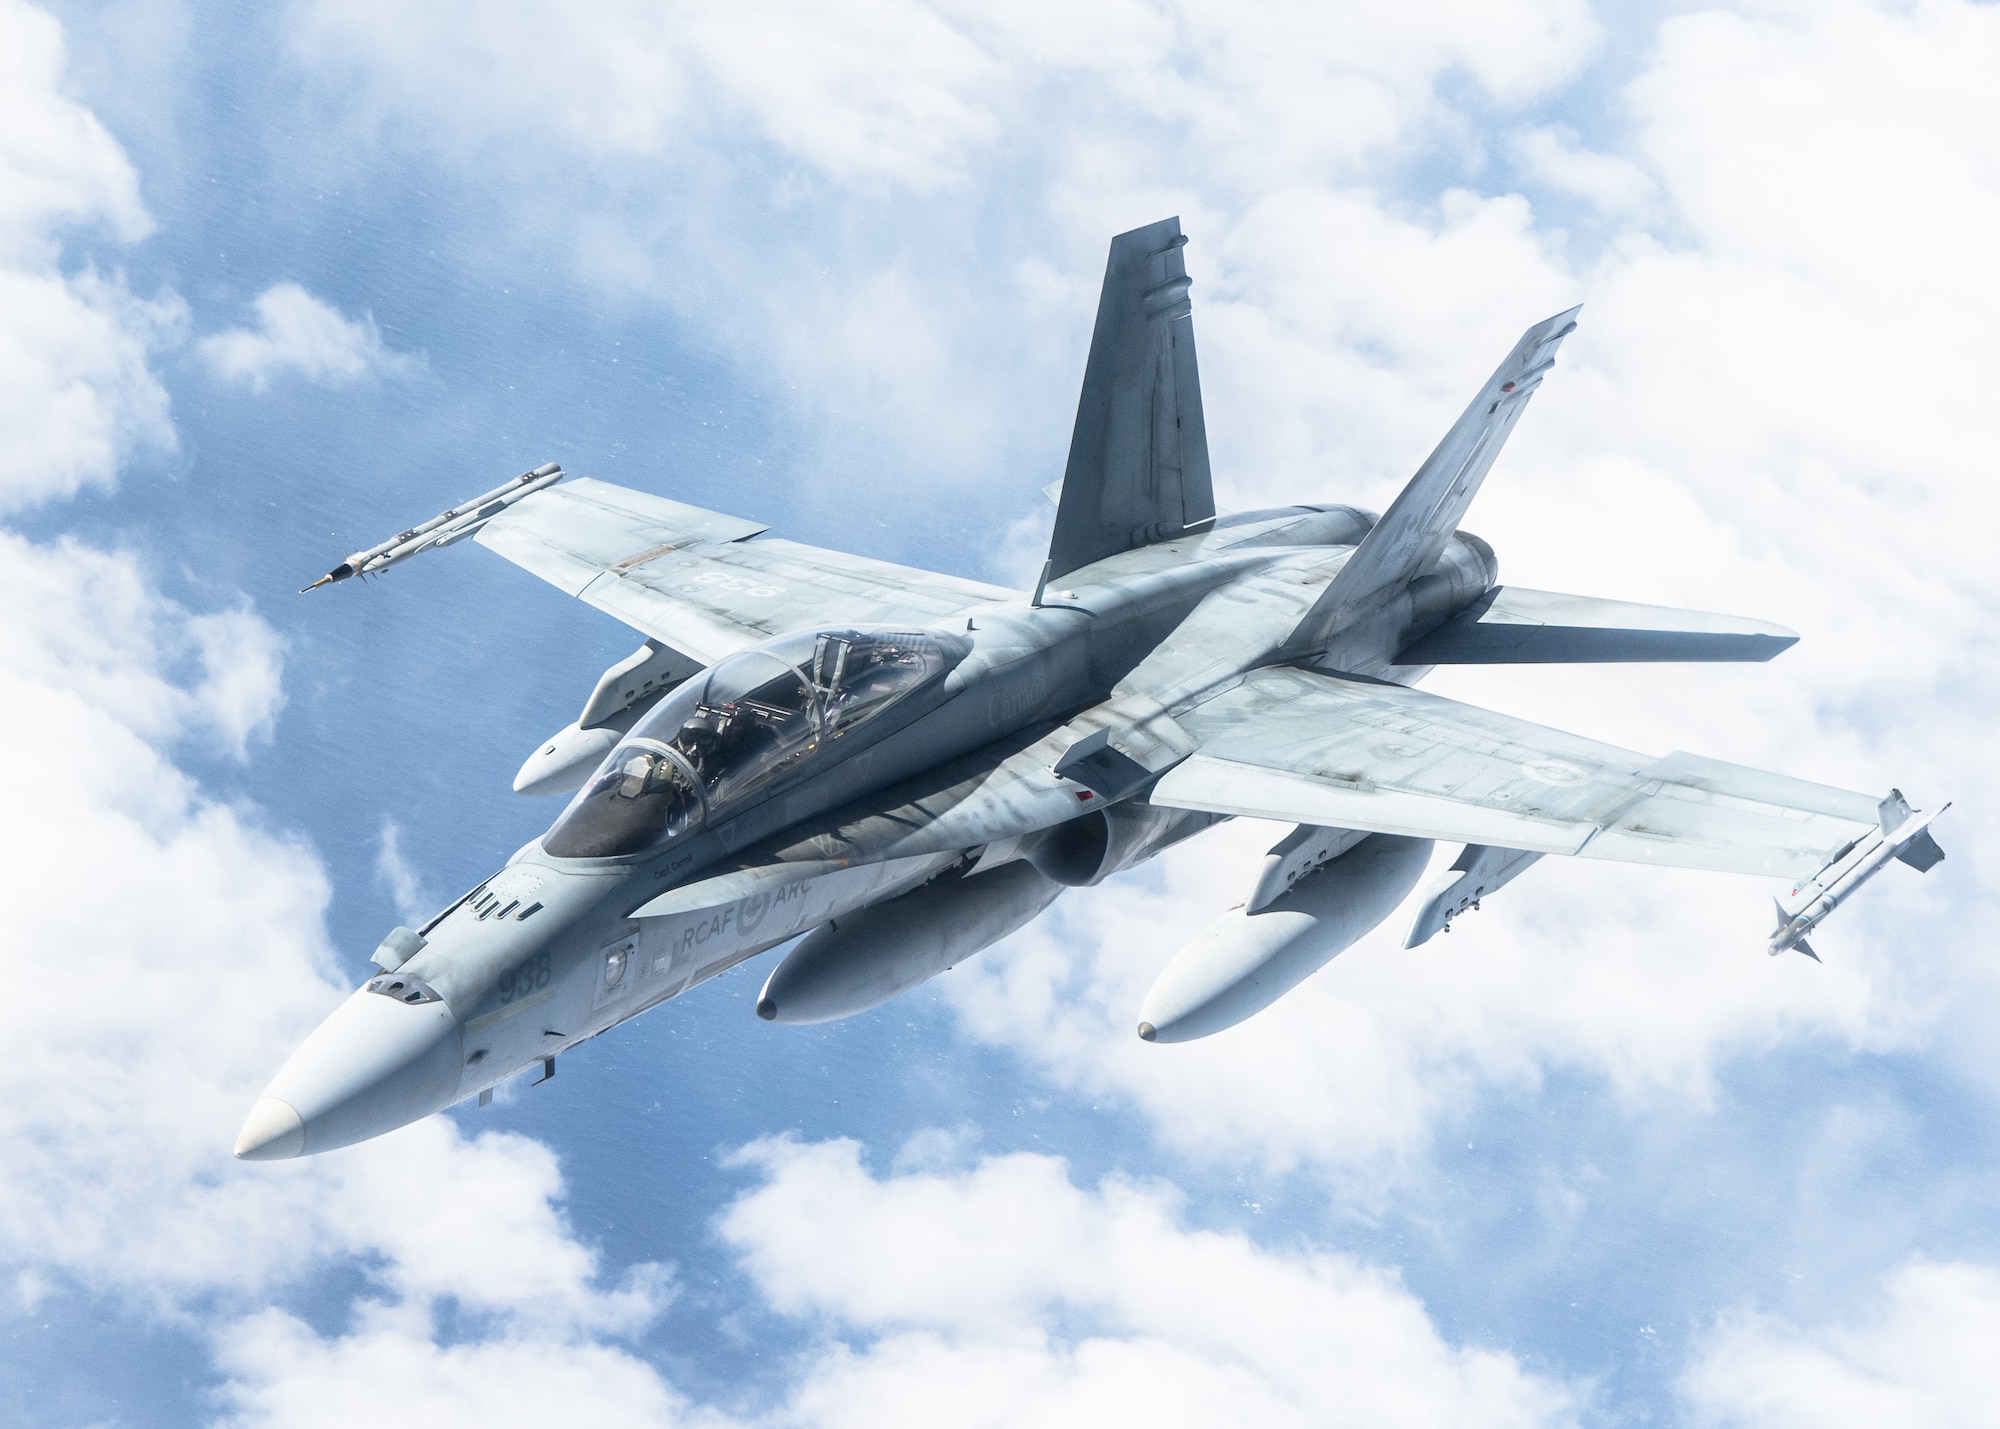 A CF-18 Hornet aircraft assigned to the 433rd Tactical Fighter Squadron flies away after receiving aerial refueling from a KC-135 Stratotanker aircraft assigned to the 6th Air Refueling Wing in support of North American Aerospace Defense Command's (NORAD) Operation Noble Defender (OND), March 16, 2022.